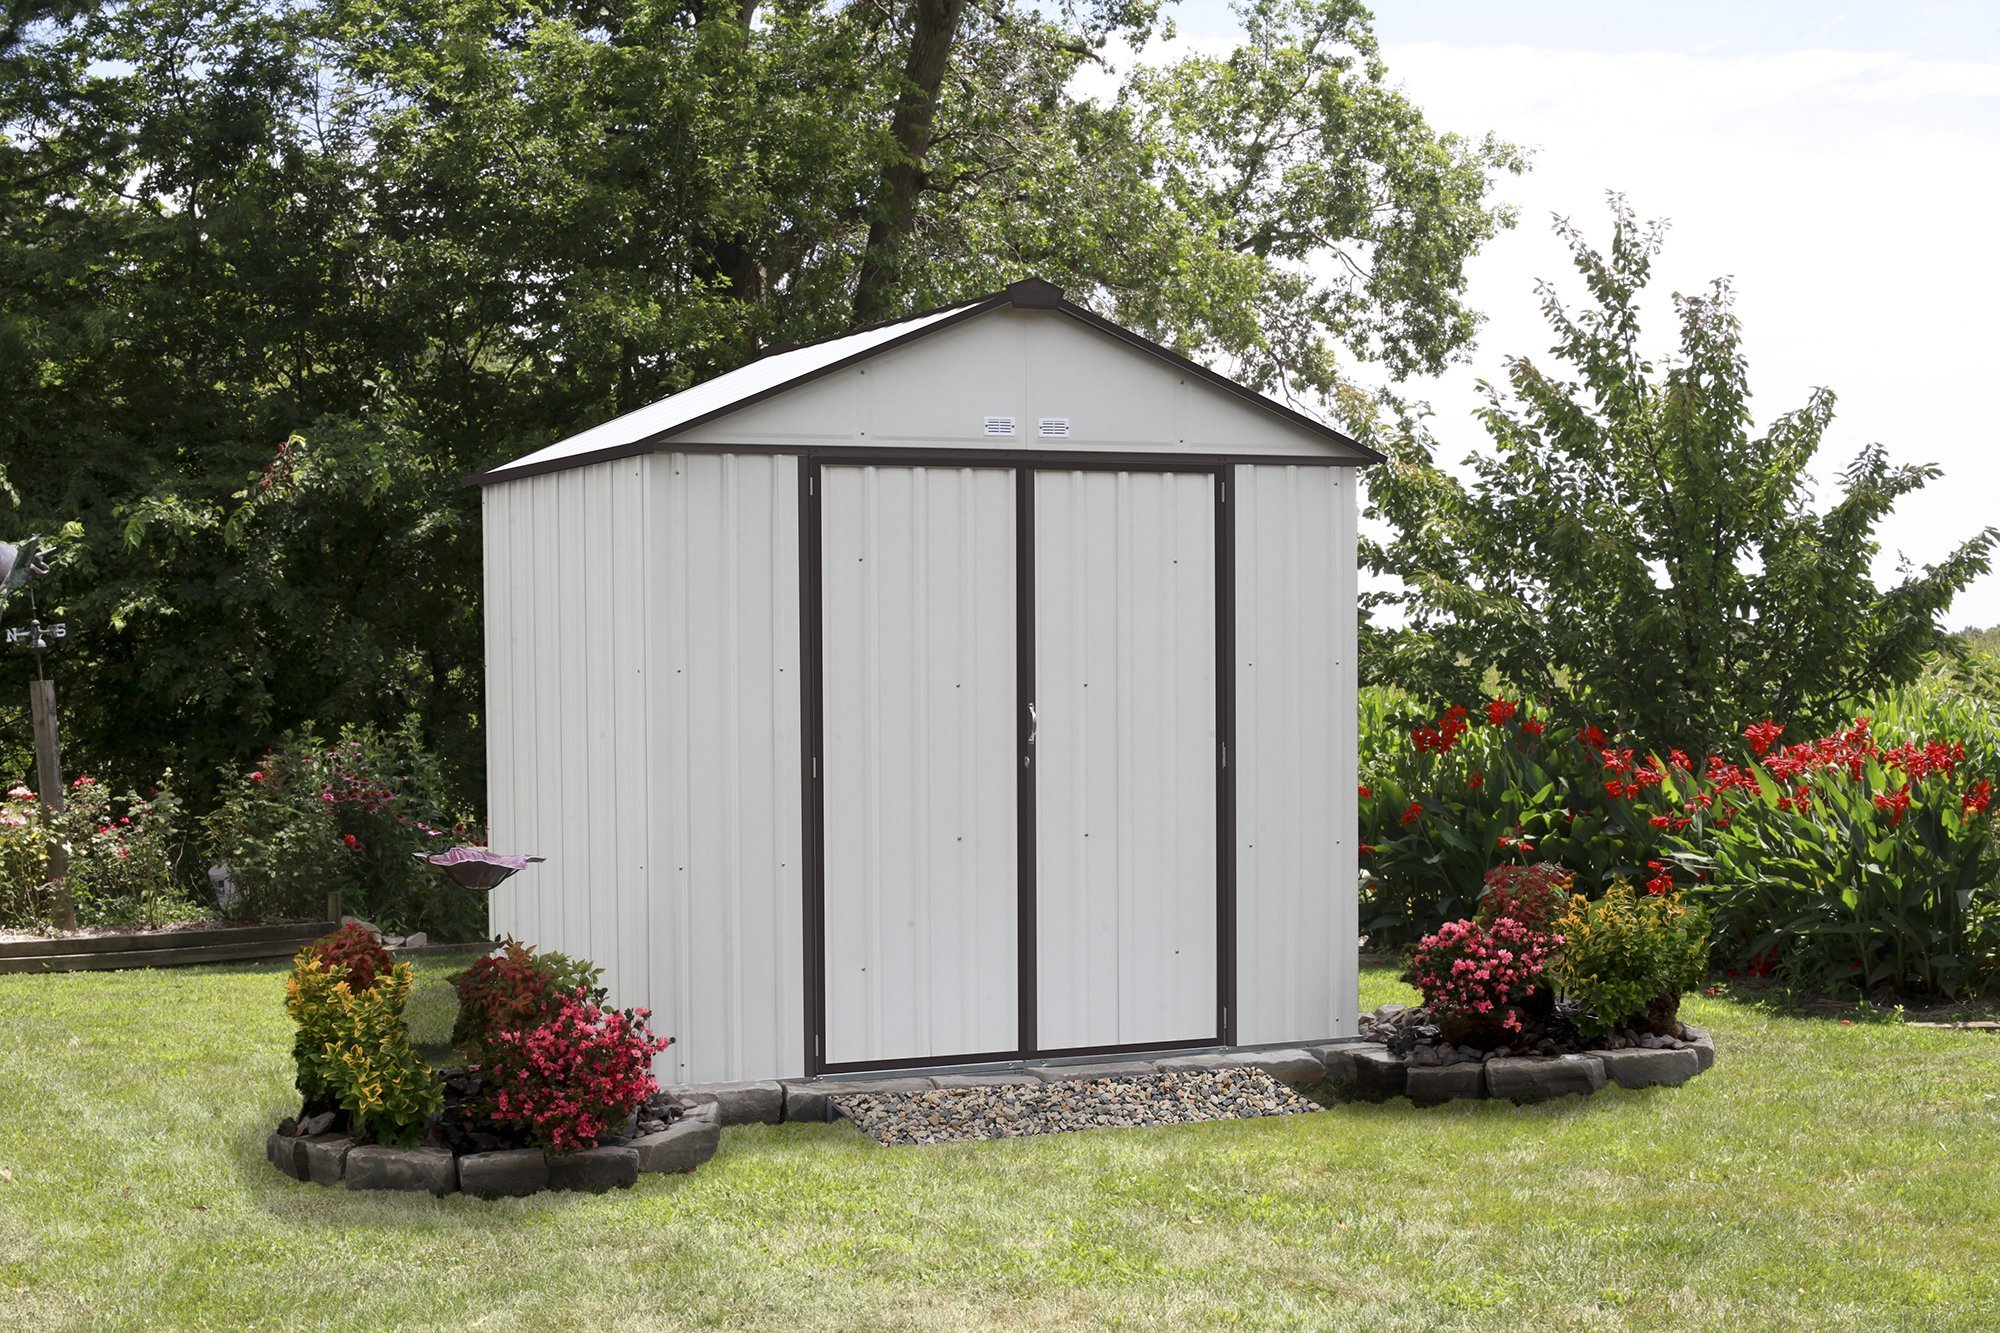 Ezee storage shed Outdoor Storage Sheds Market Revenue, Status and Outlook 2021 Market by Types, Applications, End Users and Opportunities to 2027